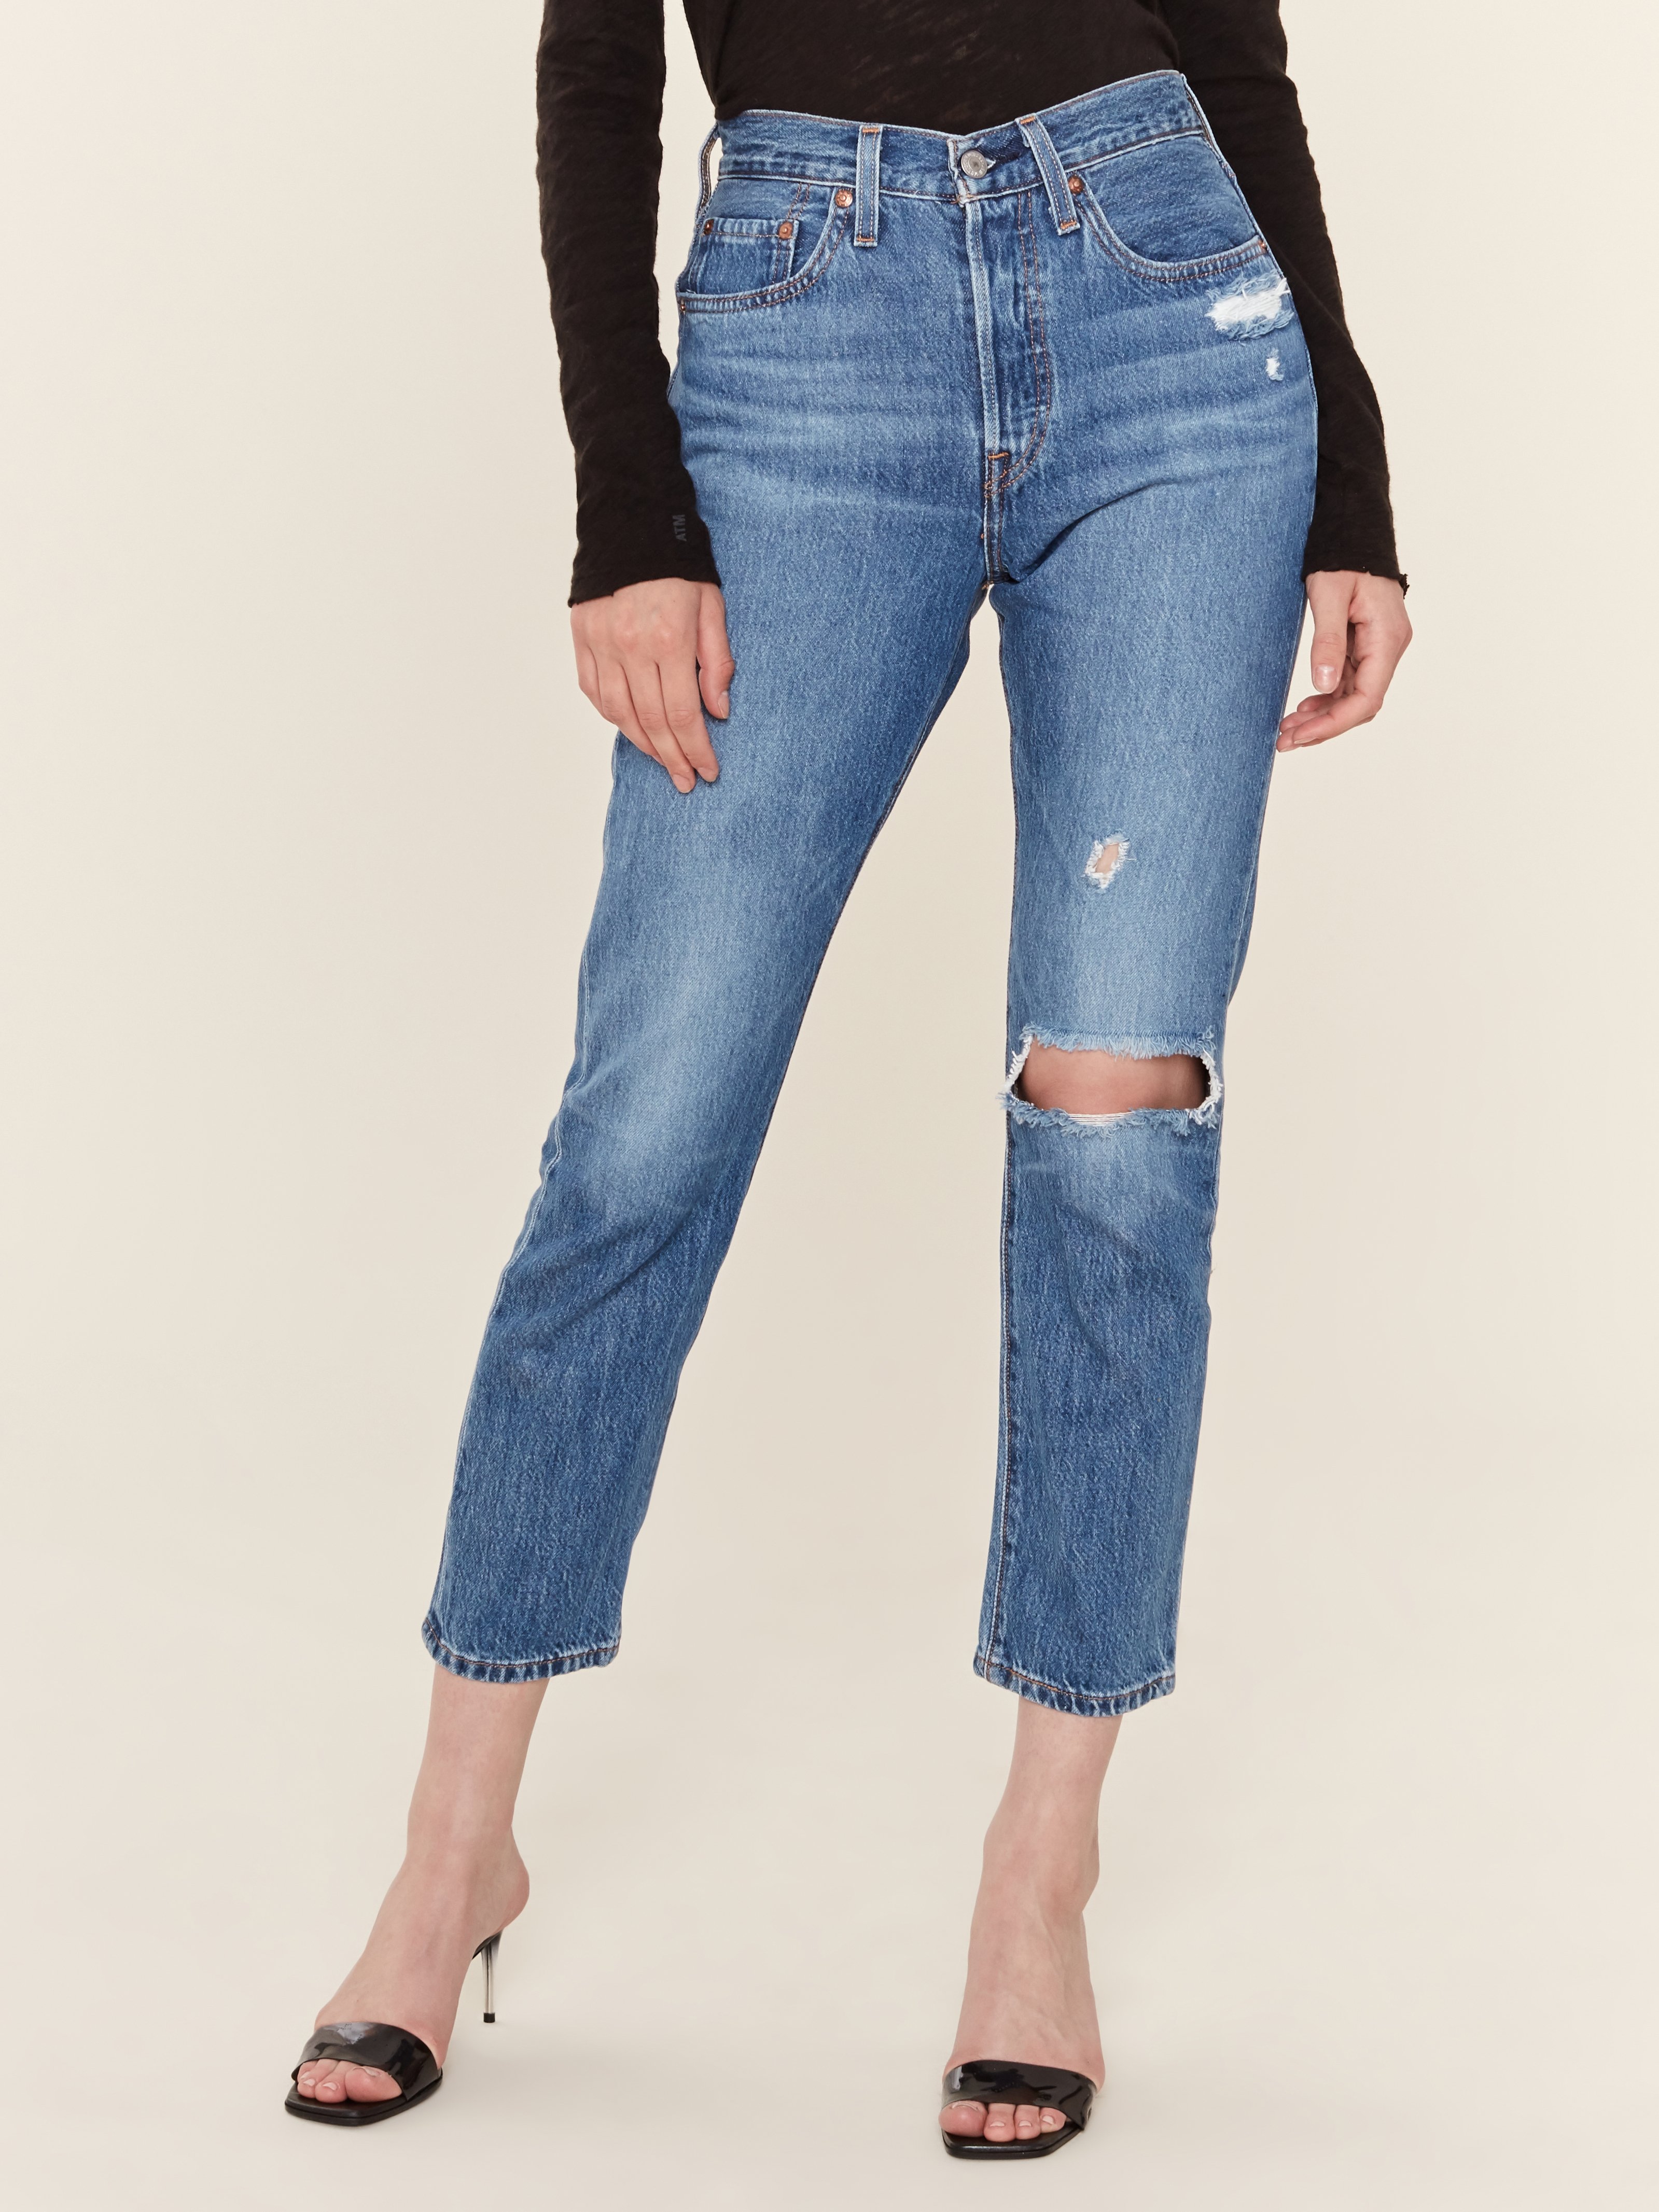 levis high waisted skinny jeans